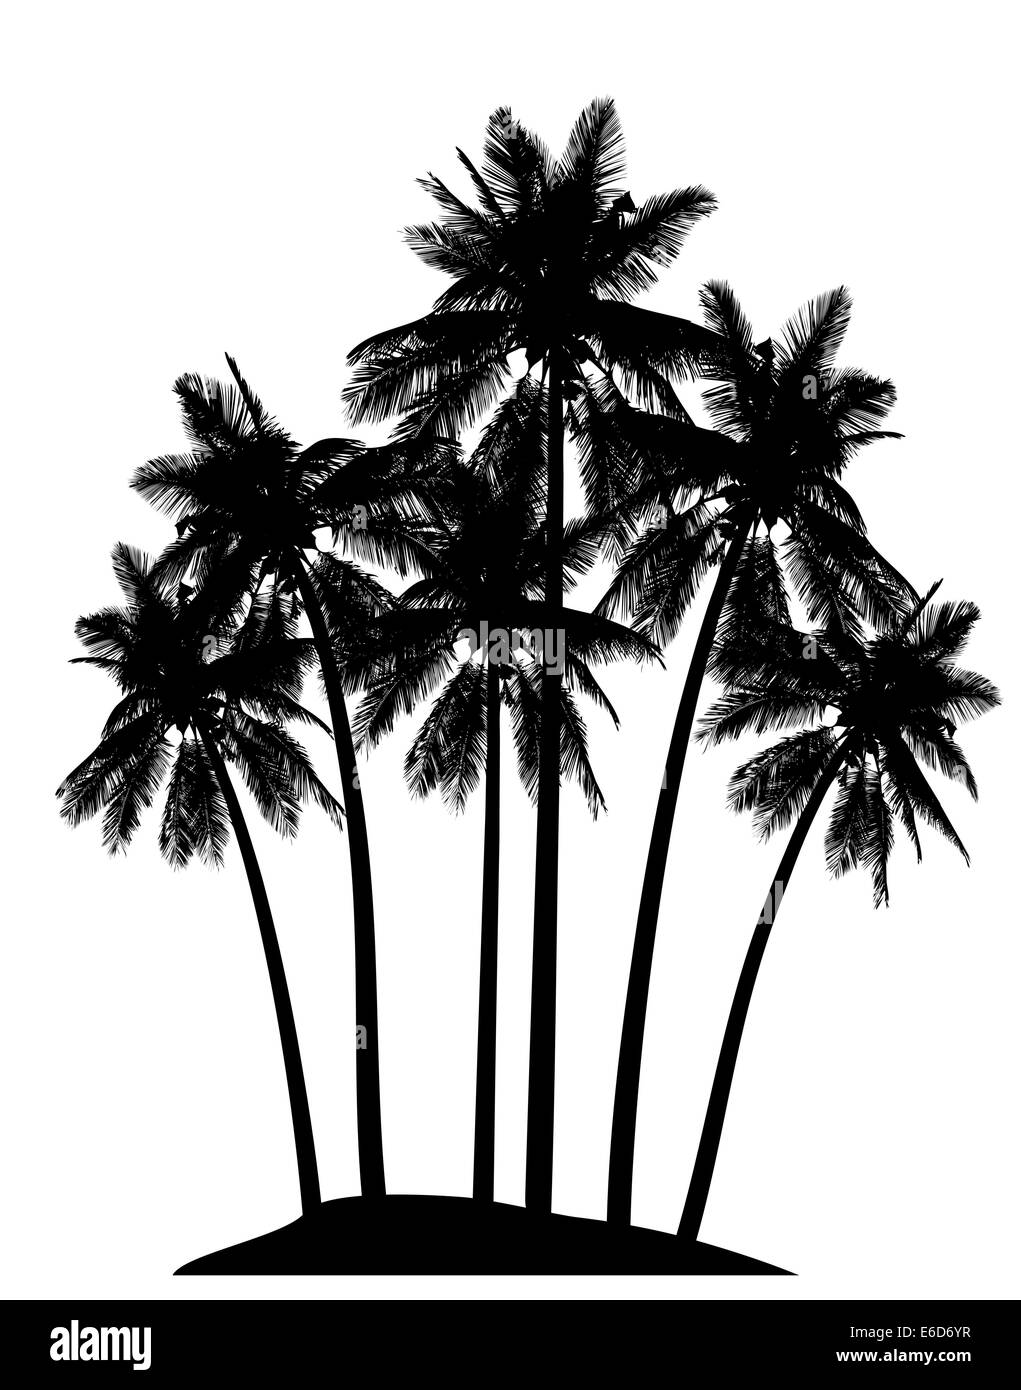 Editable vector illustration of palm tree silhouettes Stock Vector